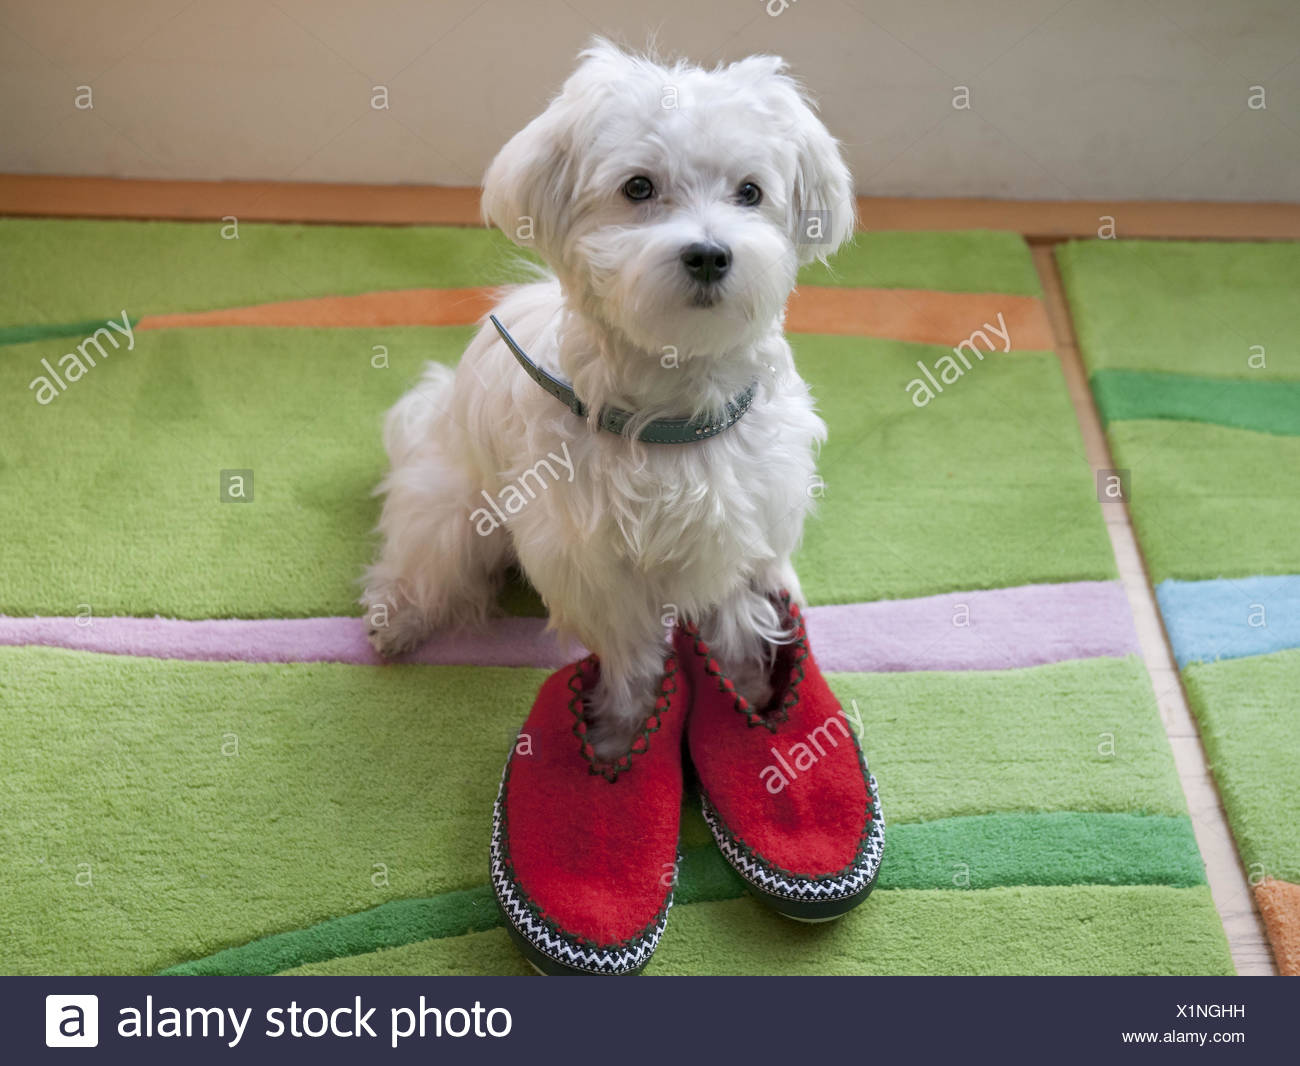 dog breed slippers